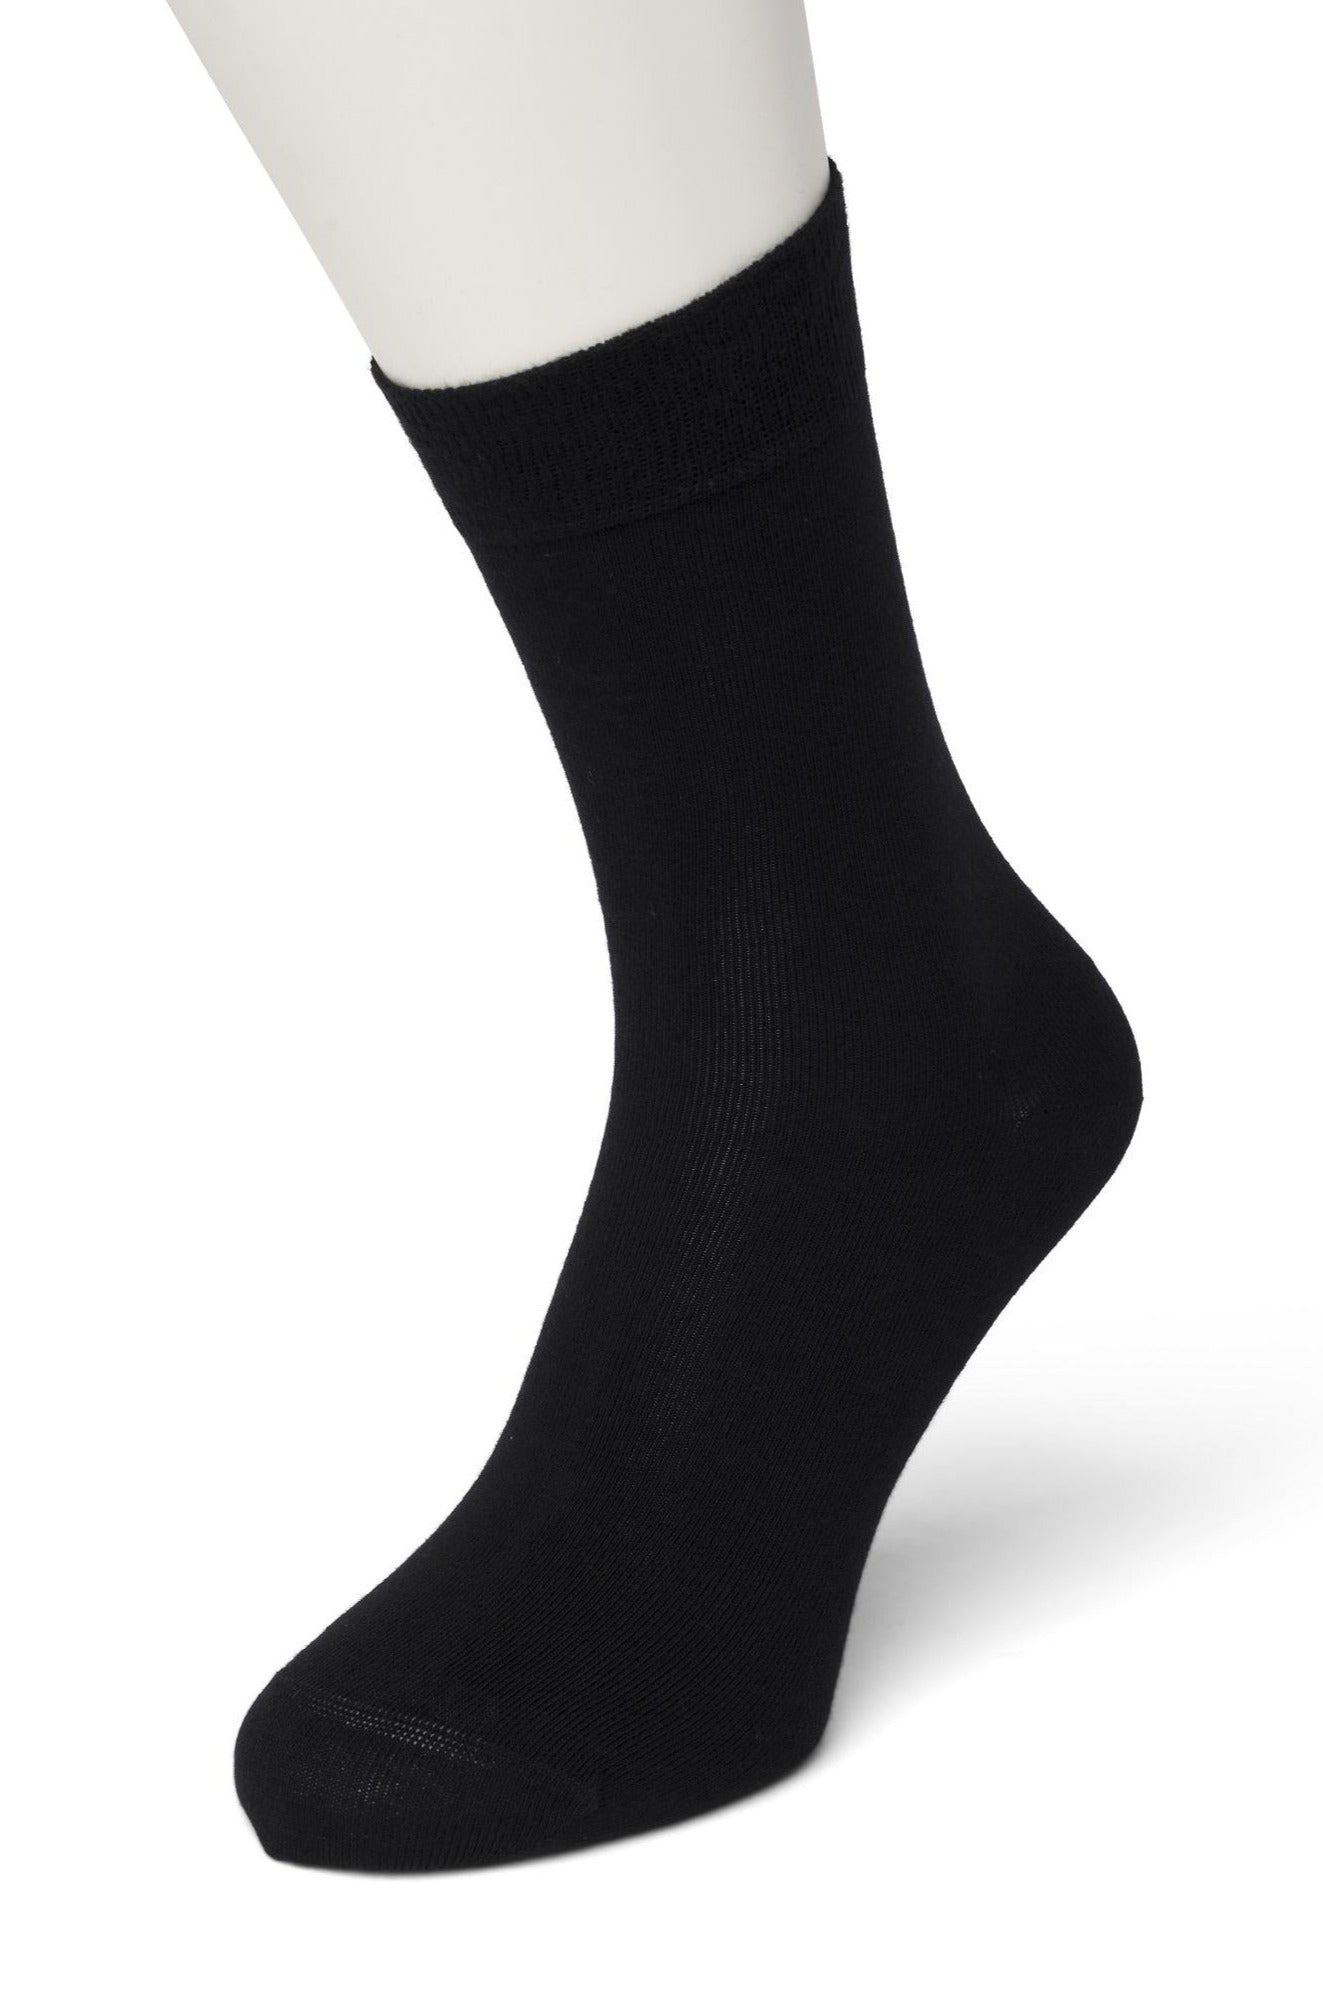 Bonnie Doon 83422 Cotton Sock - Black ankle socks available in women sizes